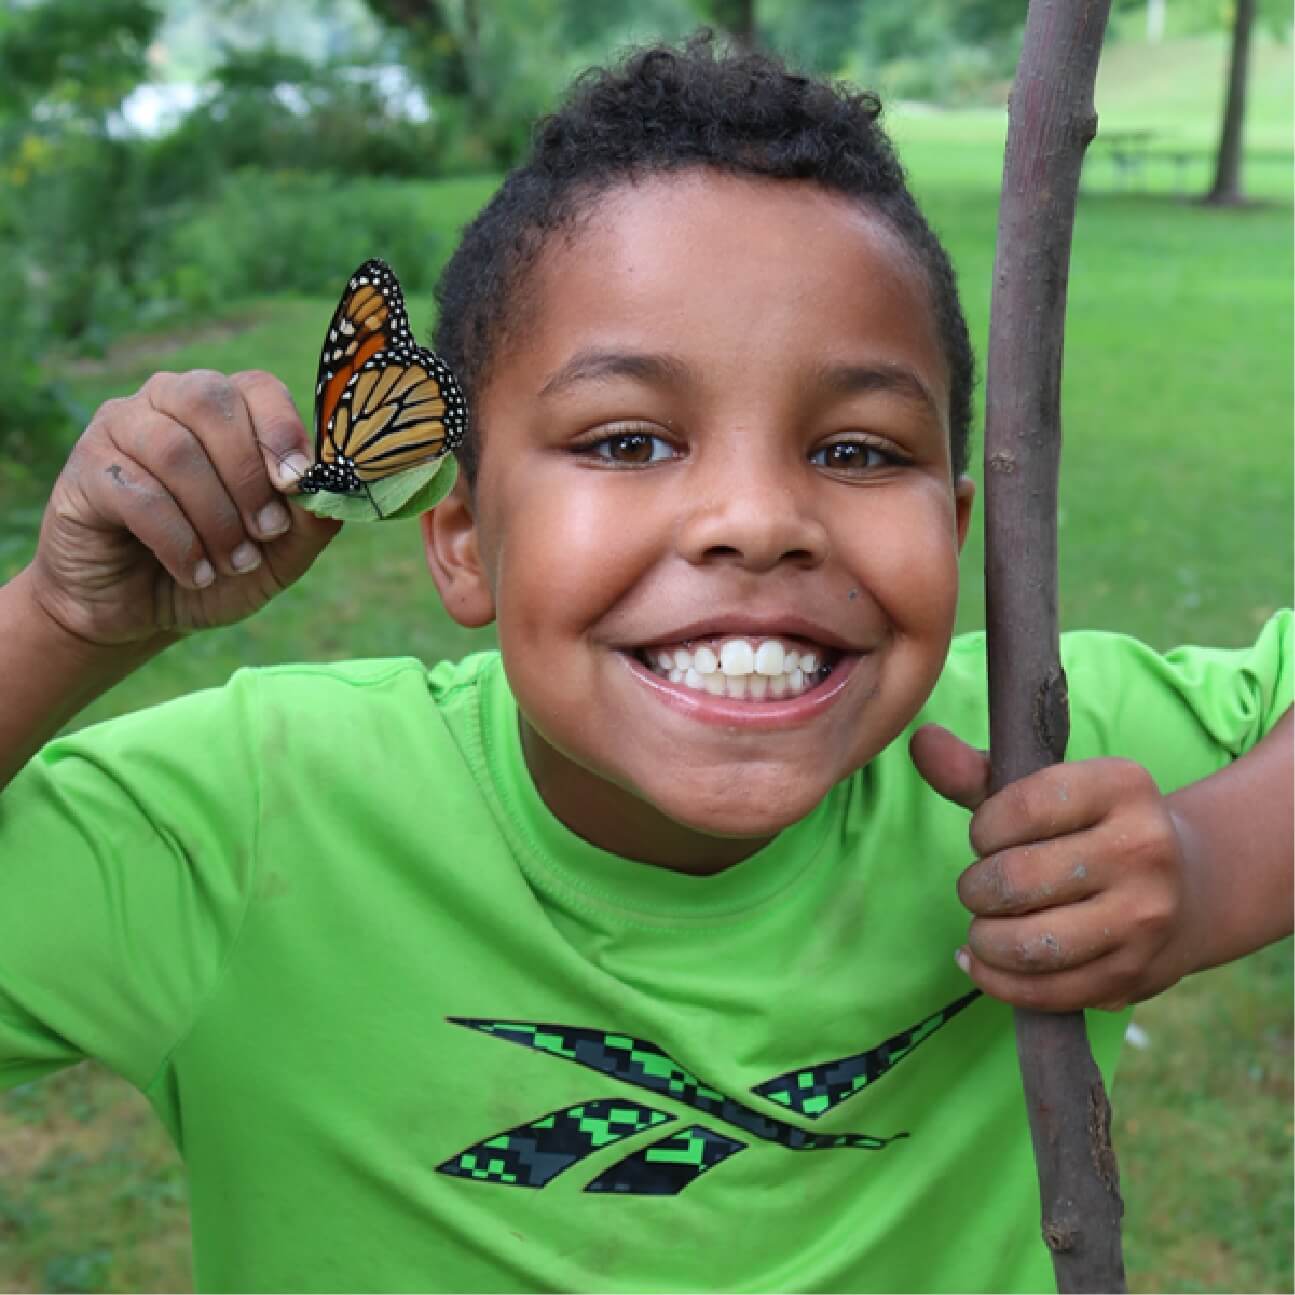 Our Featured Partners.  Click here to learn more about the Urban Ecology Center that connects youth in cities to nature and each other. The picture shown is a kid holding a butterfly and smiling.